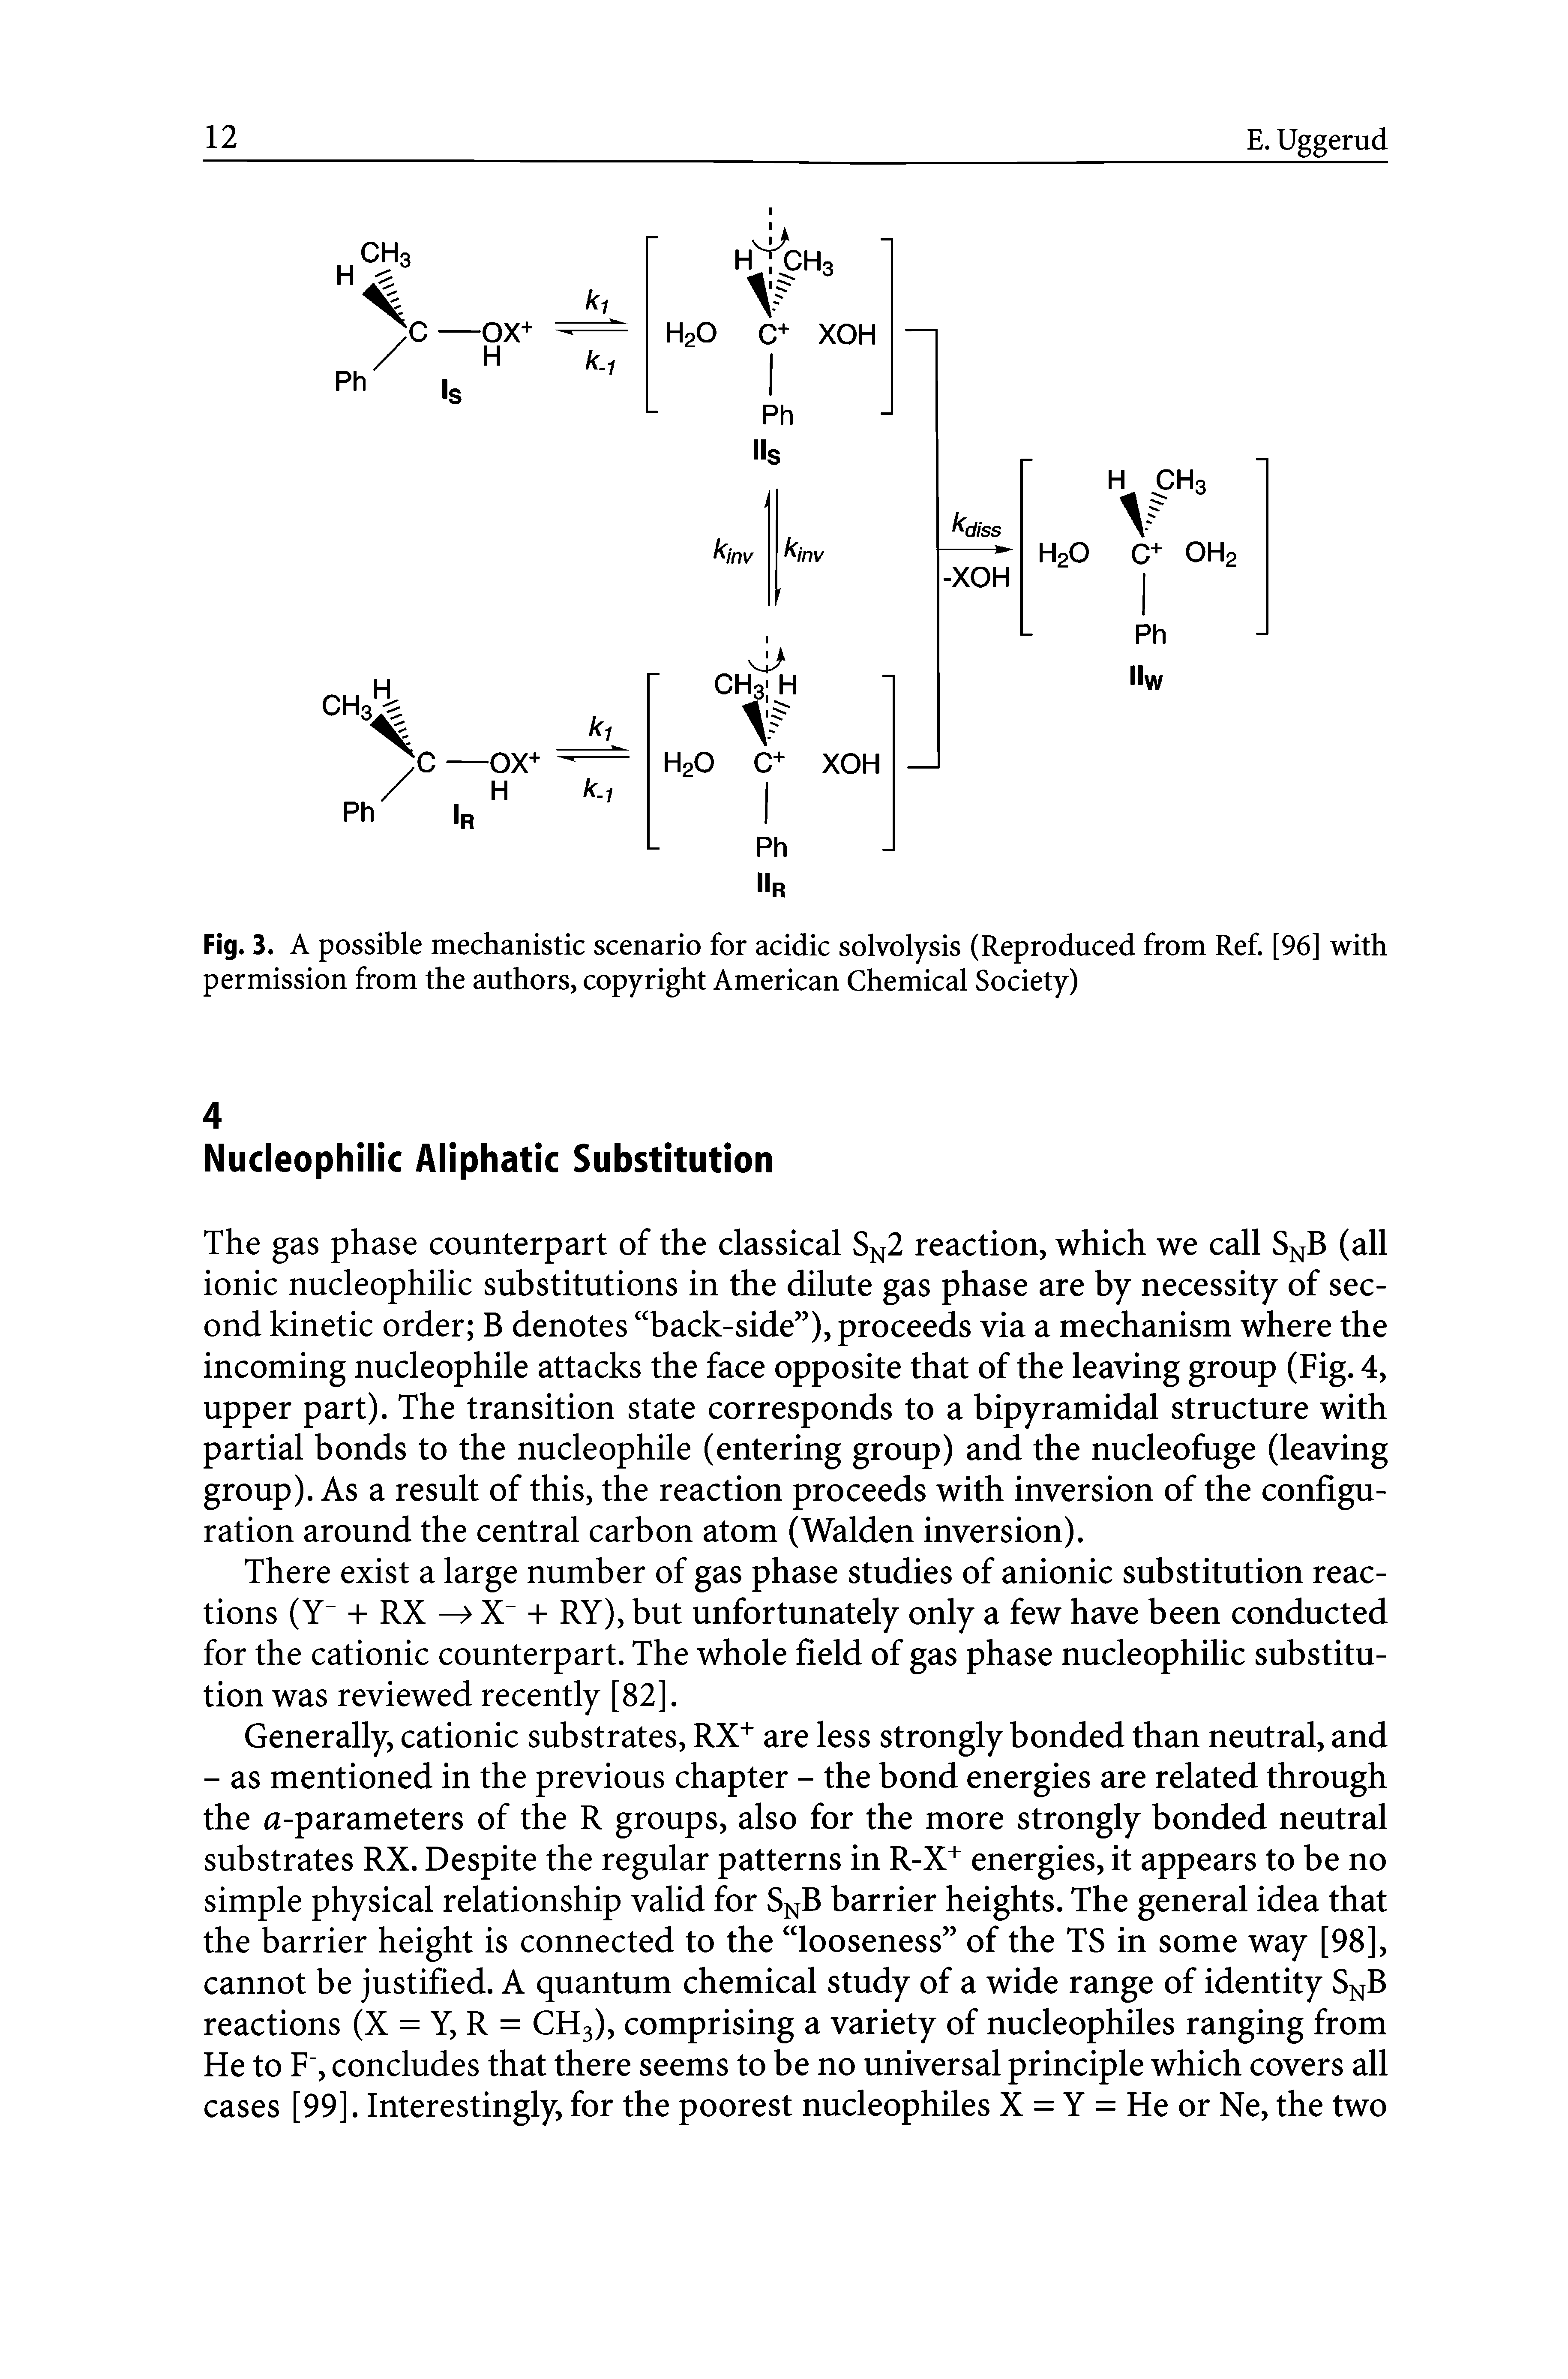 Fig. 3. A possible mechanistic scenario for acidic solvolysis (Reproduced from Ref. [96] with permission from the authors, copyright American Chemical Society)...